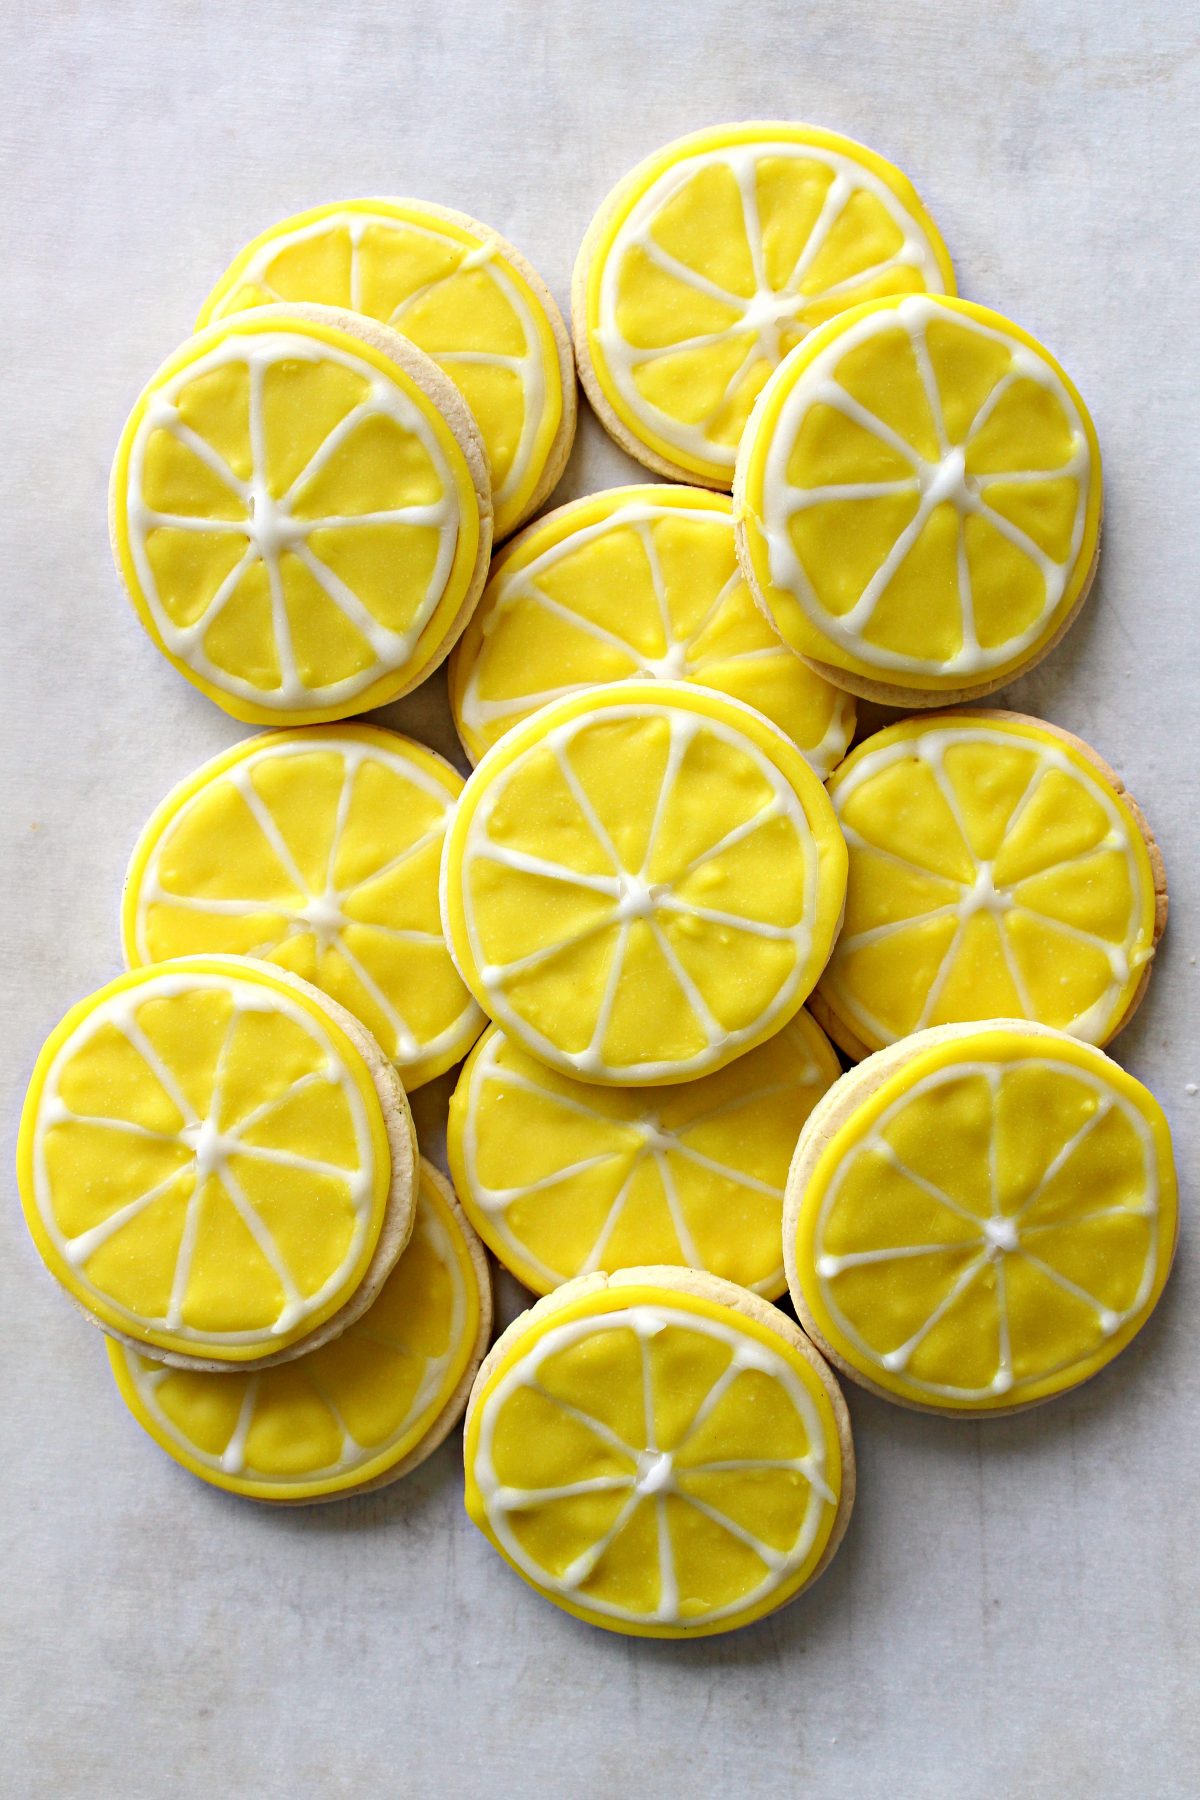 Sugar Cookie Lemon Slices look like sliced lemons, iced yellow with white icing segment lines.